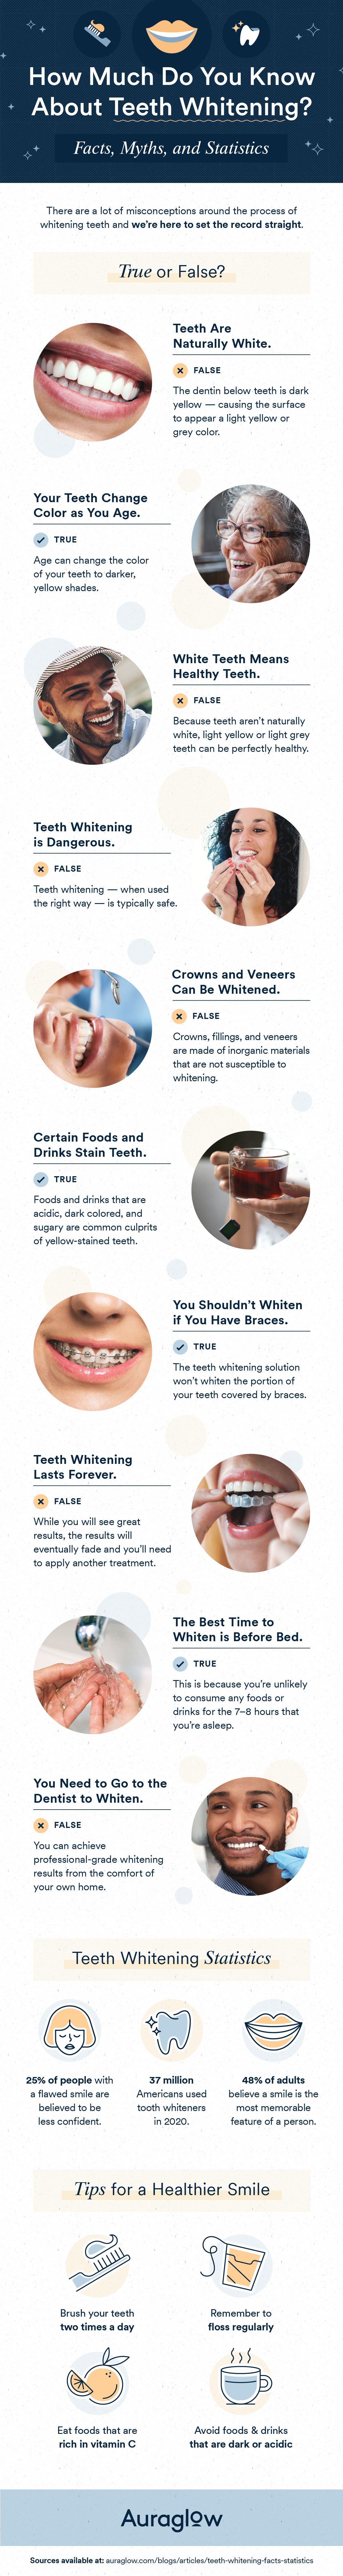 teeth whitening facts infographic 